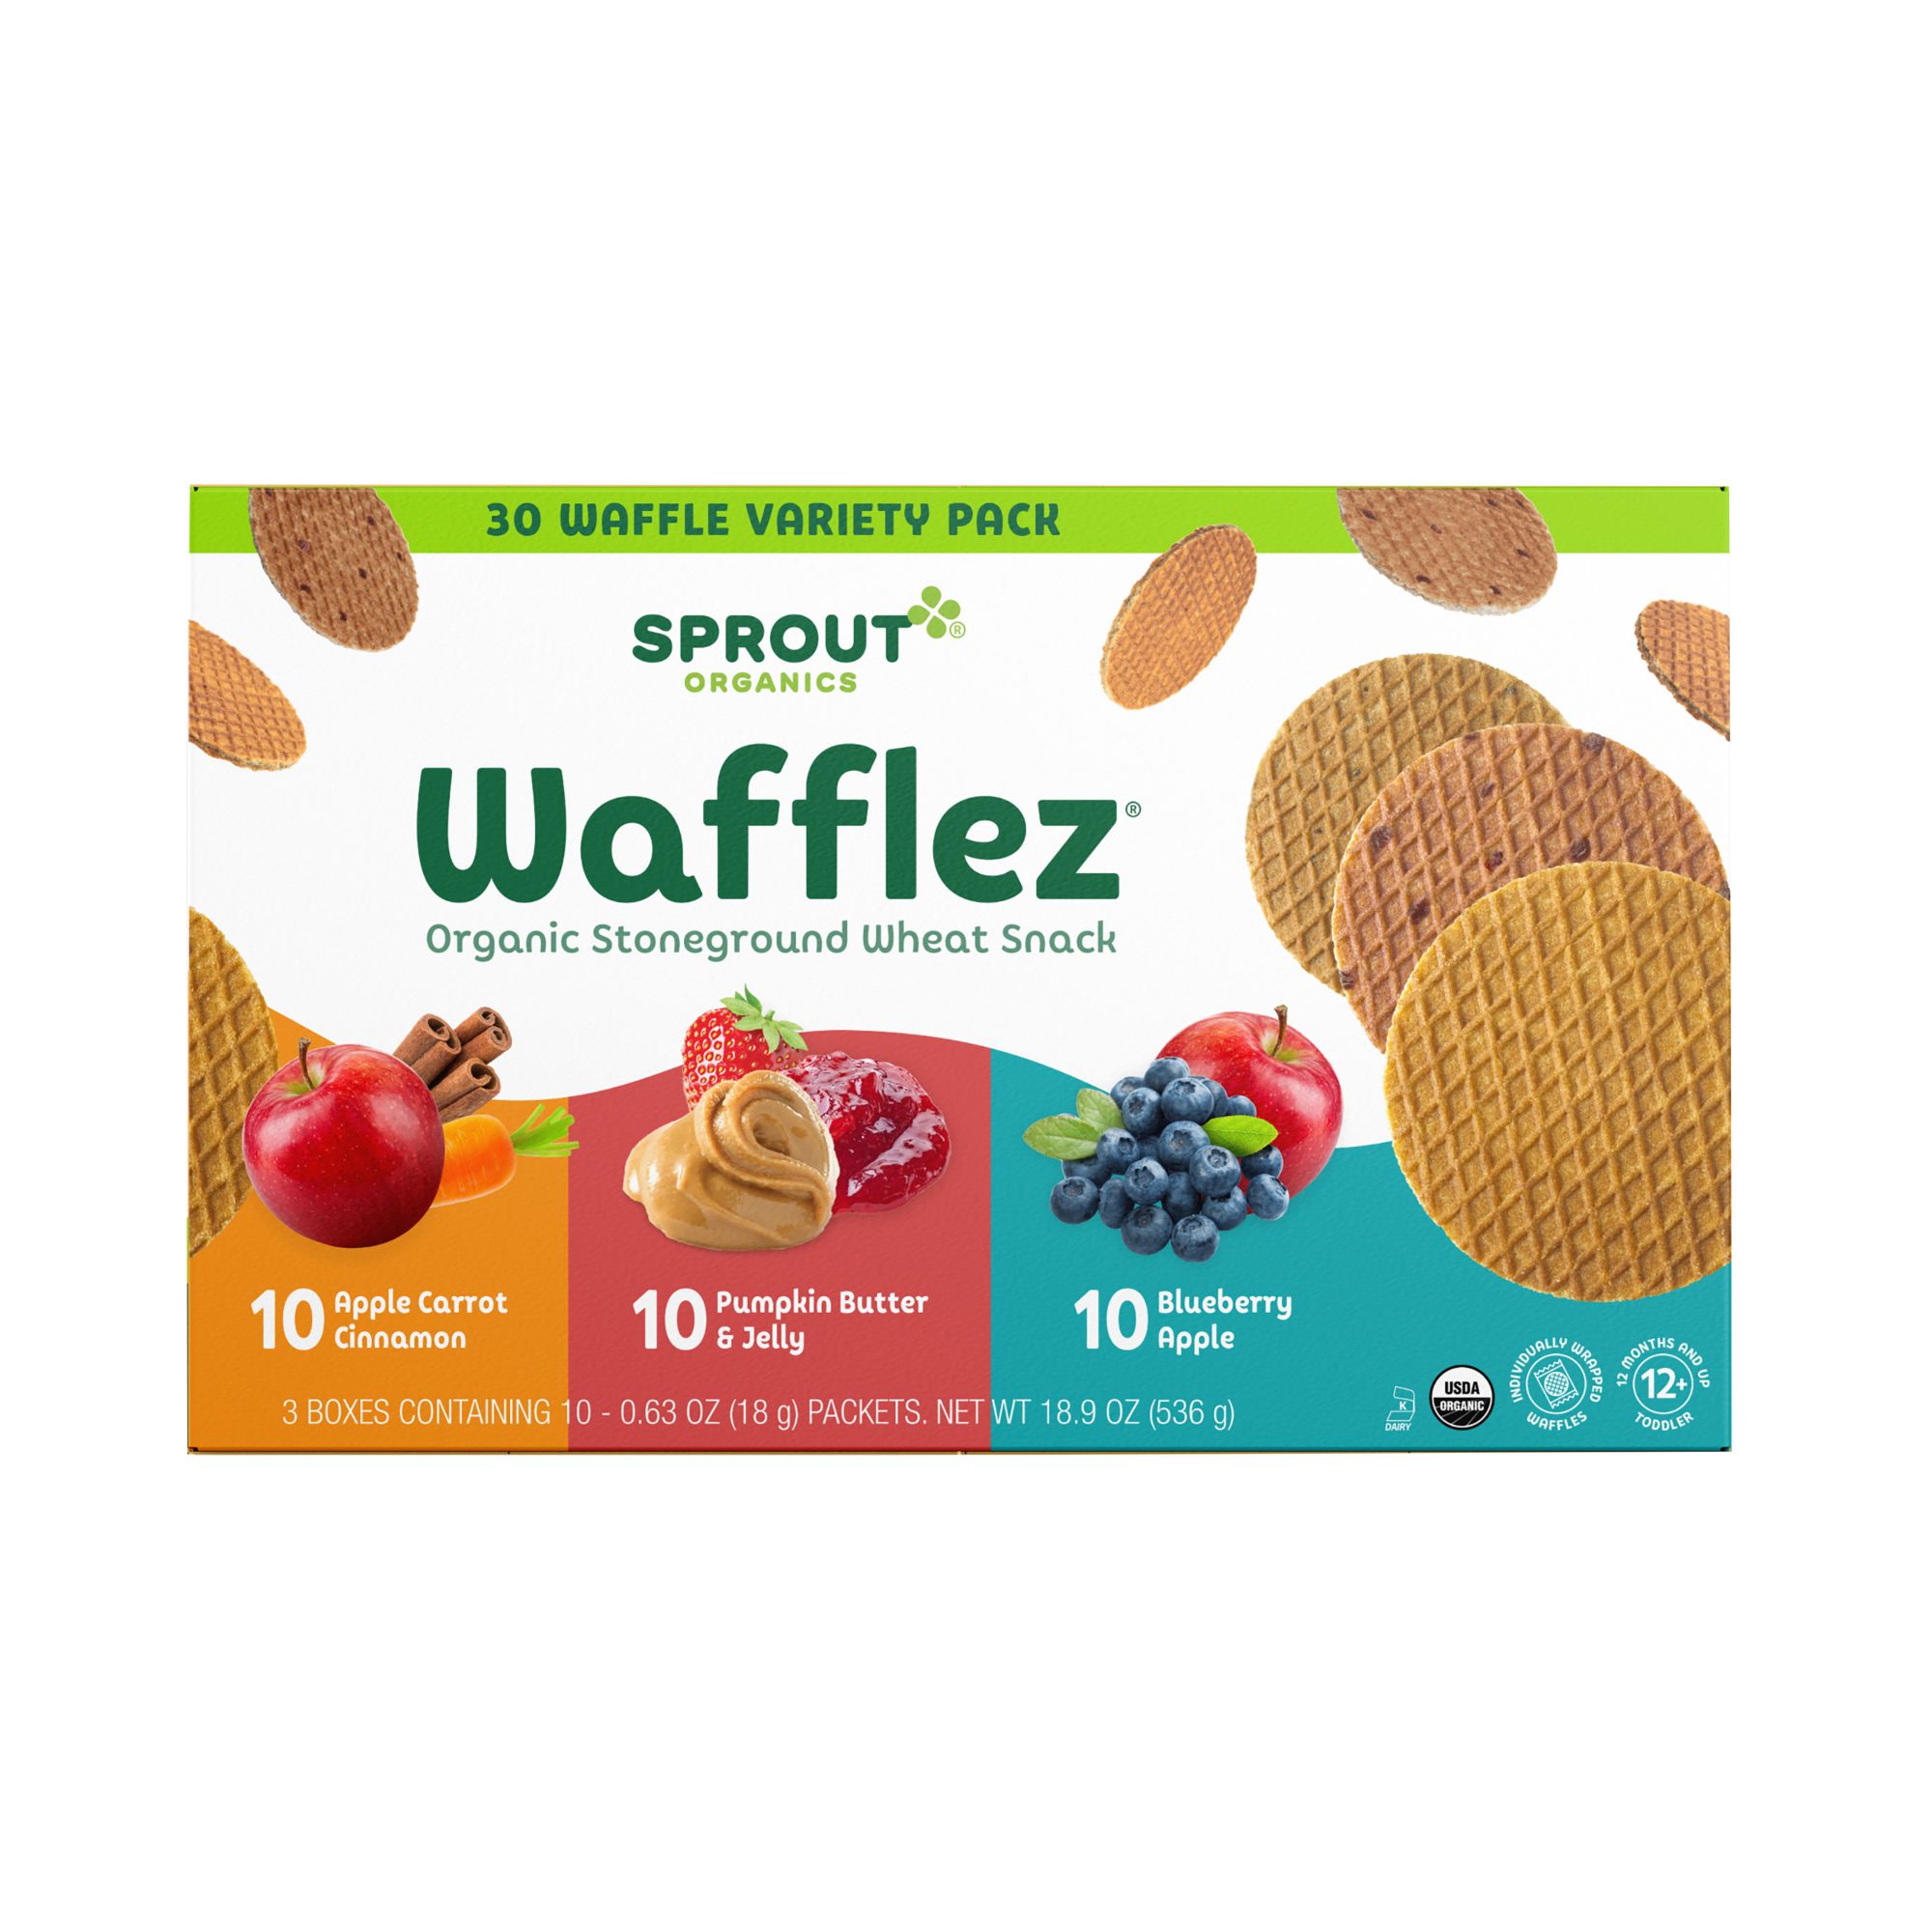 Sprout Wafflez Variety Pack, 30 ct.